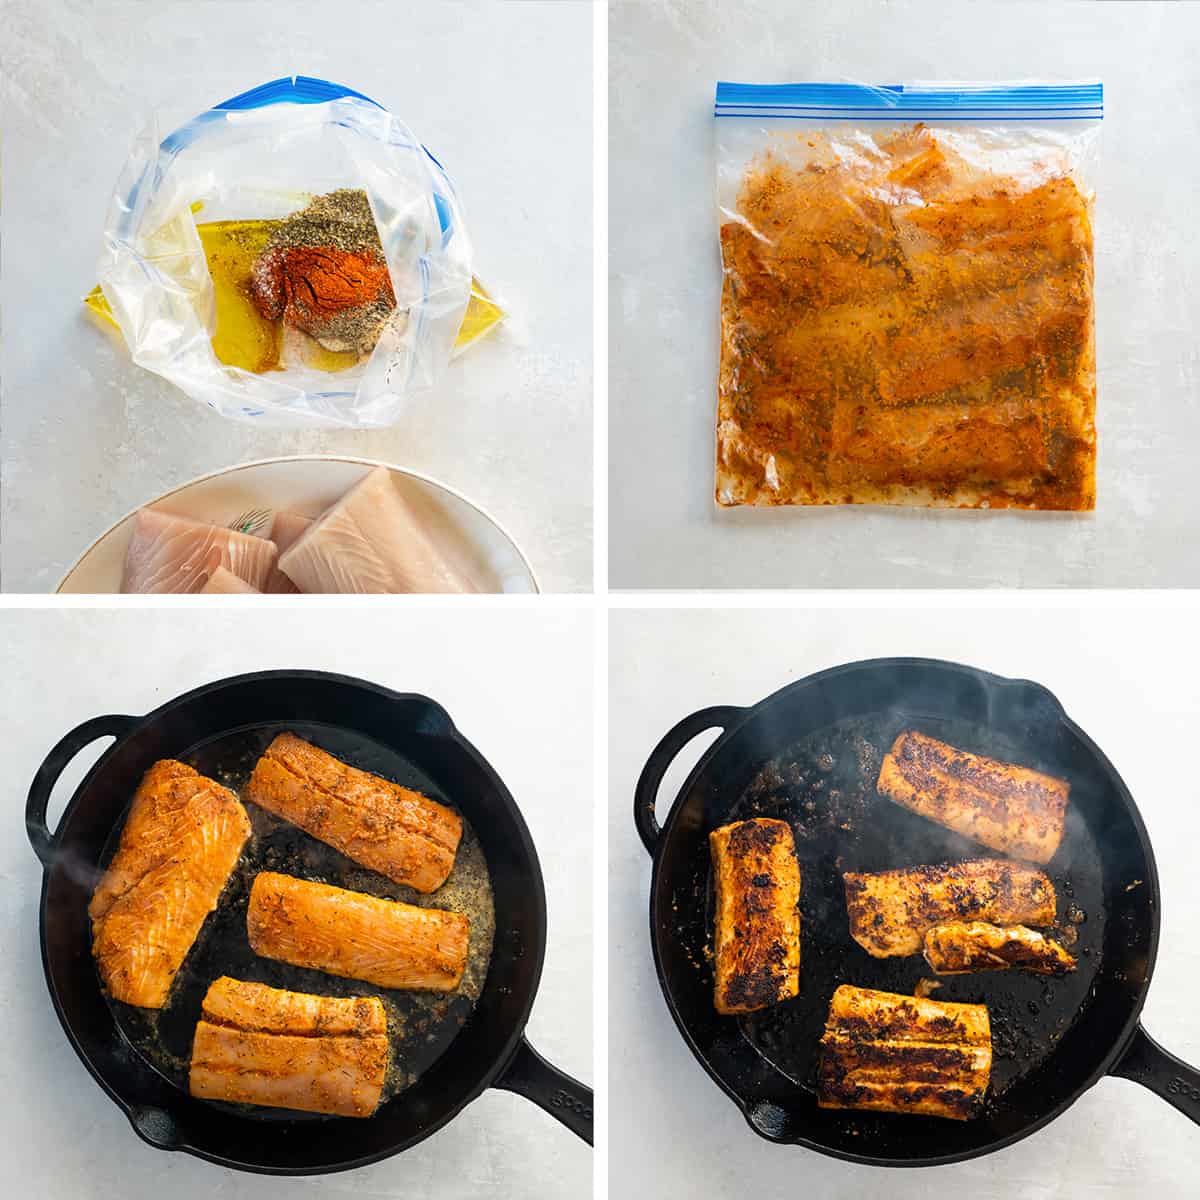 Fish fillets marinating in a seasoning and oil mixture in a plastic storage bag. The marinated fillets cooking in a cast iron skillet.